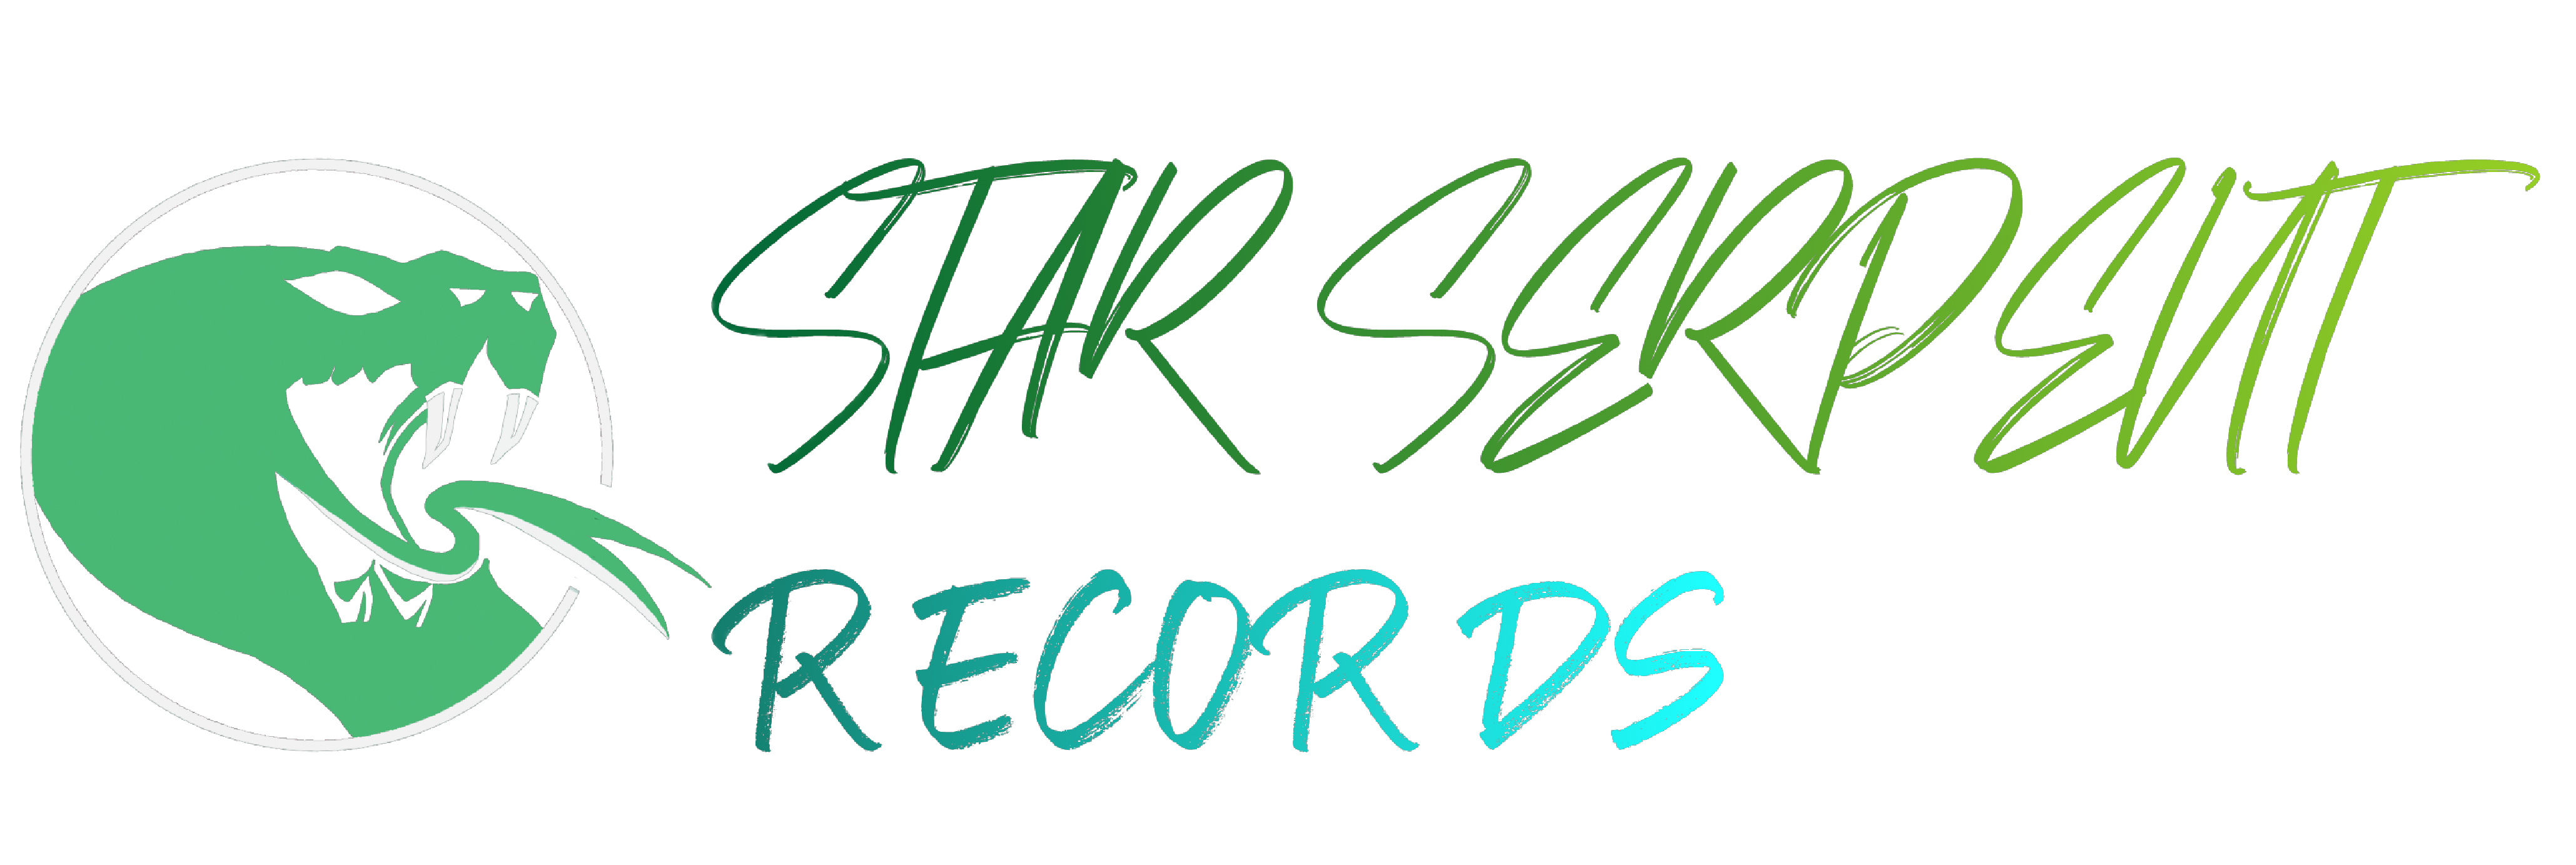 Image shows Star Serpent Records logo